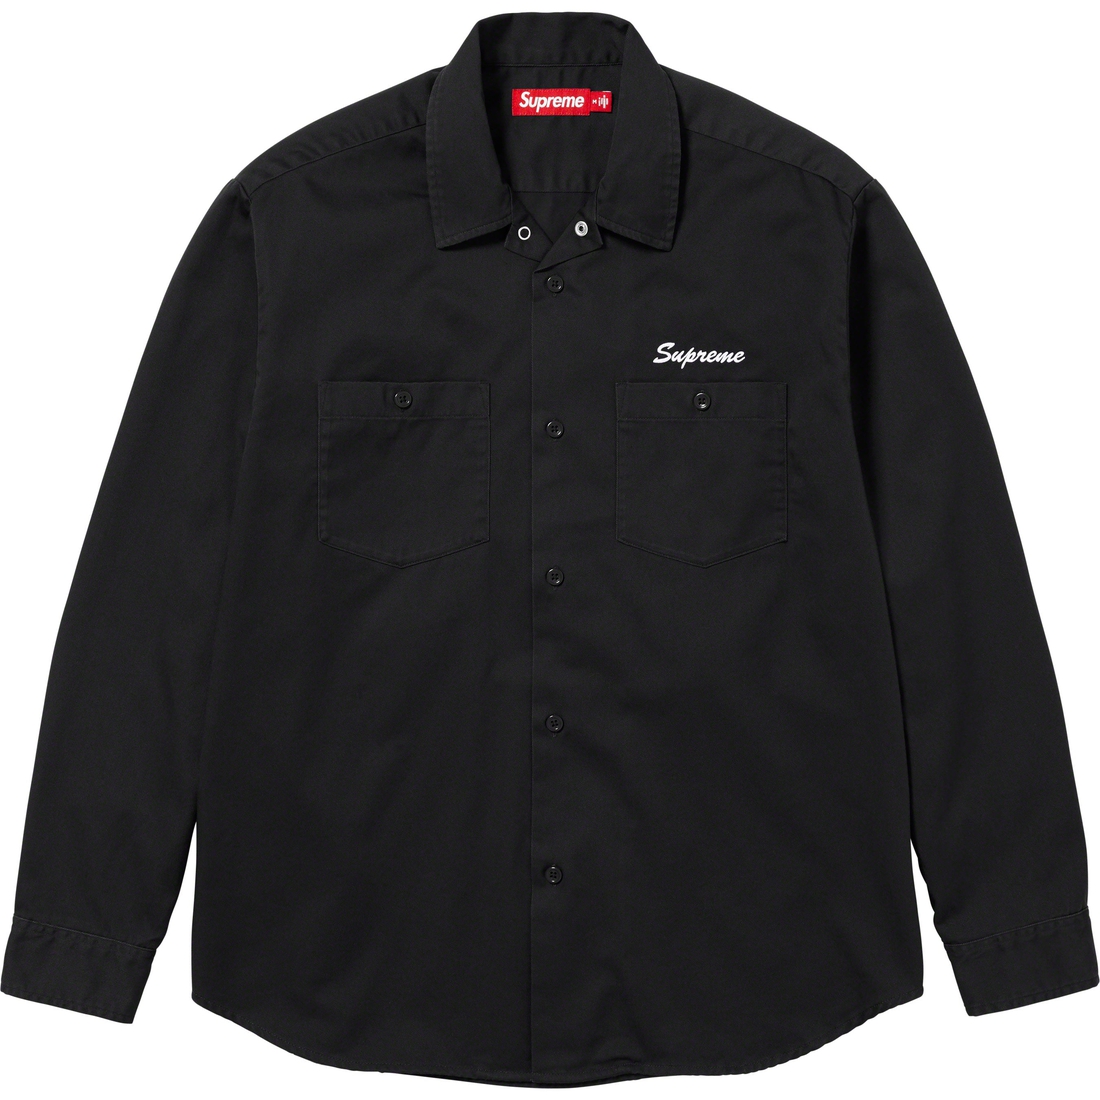 Details on American Psycho Work Shirt Black from fall winter 2023 (Price is $148)